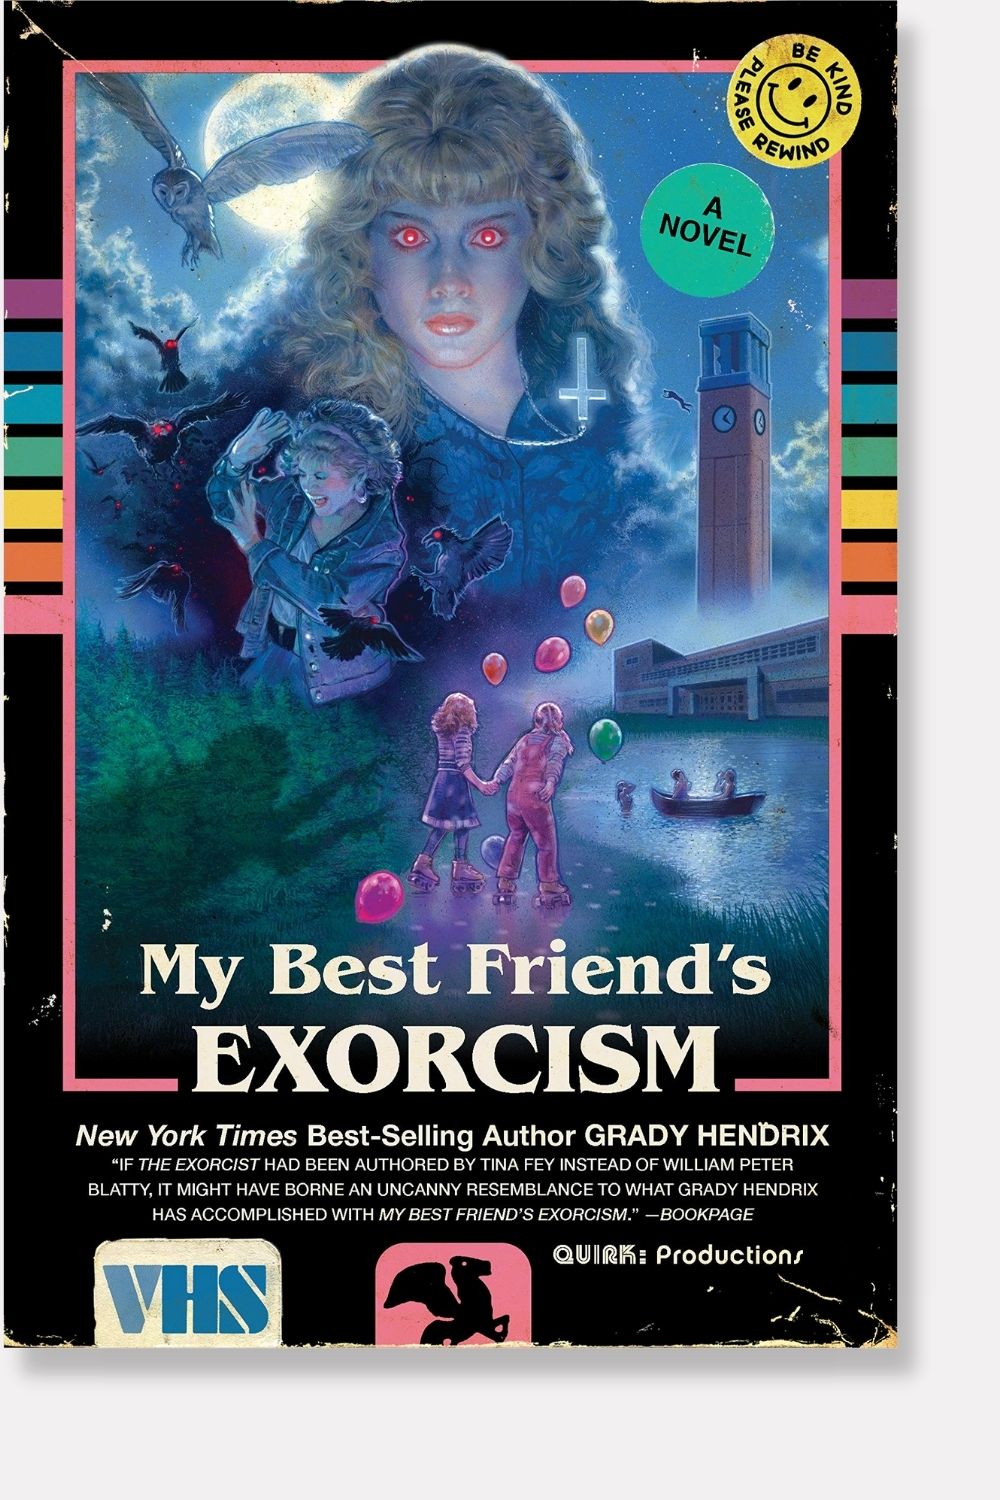 My Best Friend's Exorcism book cover